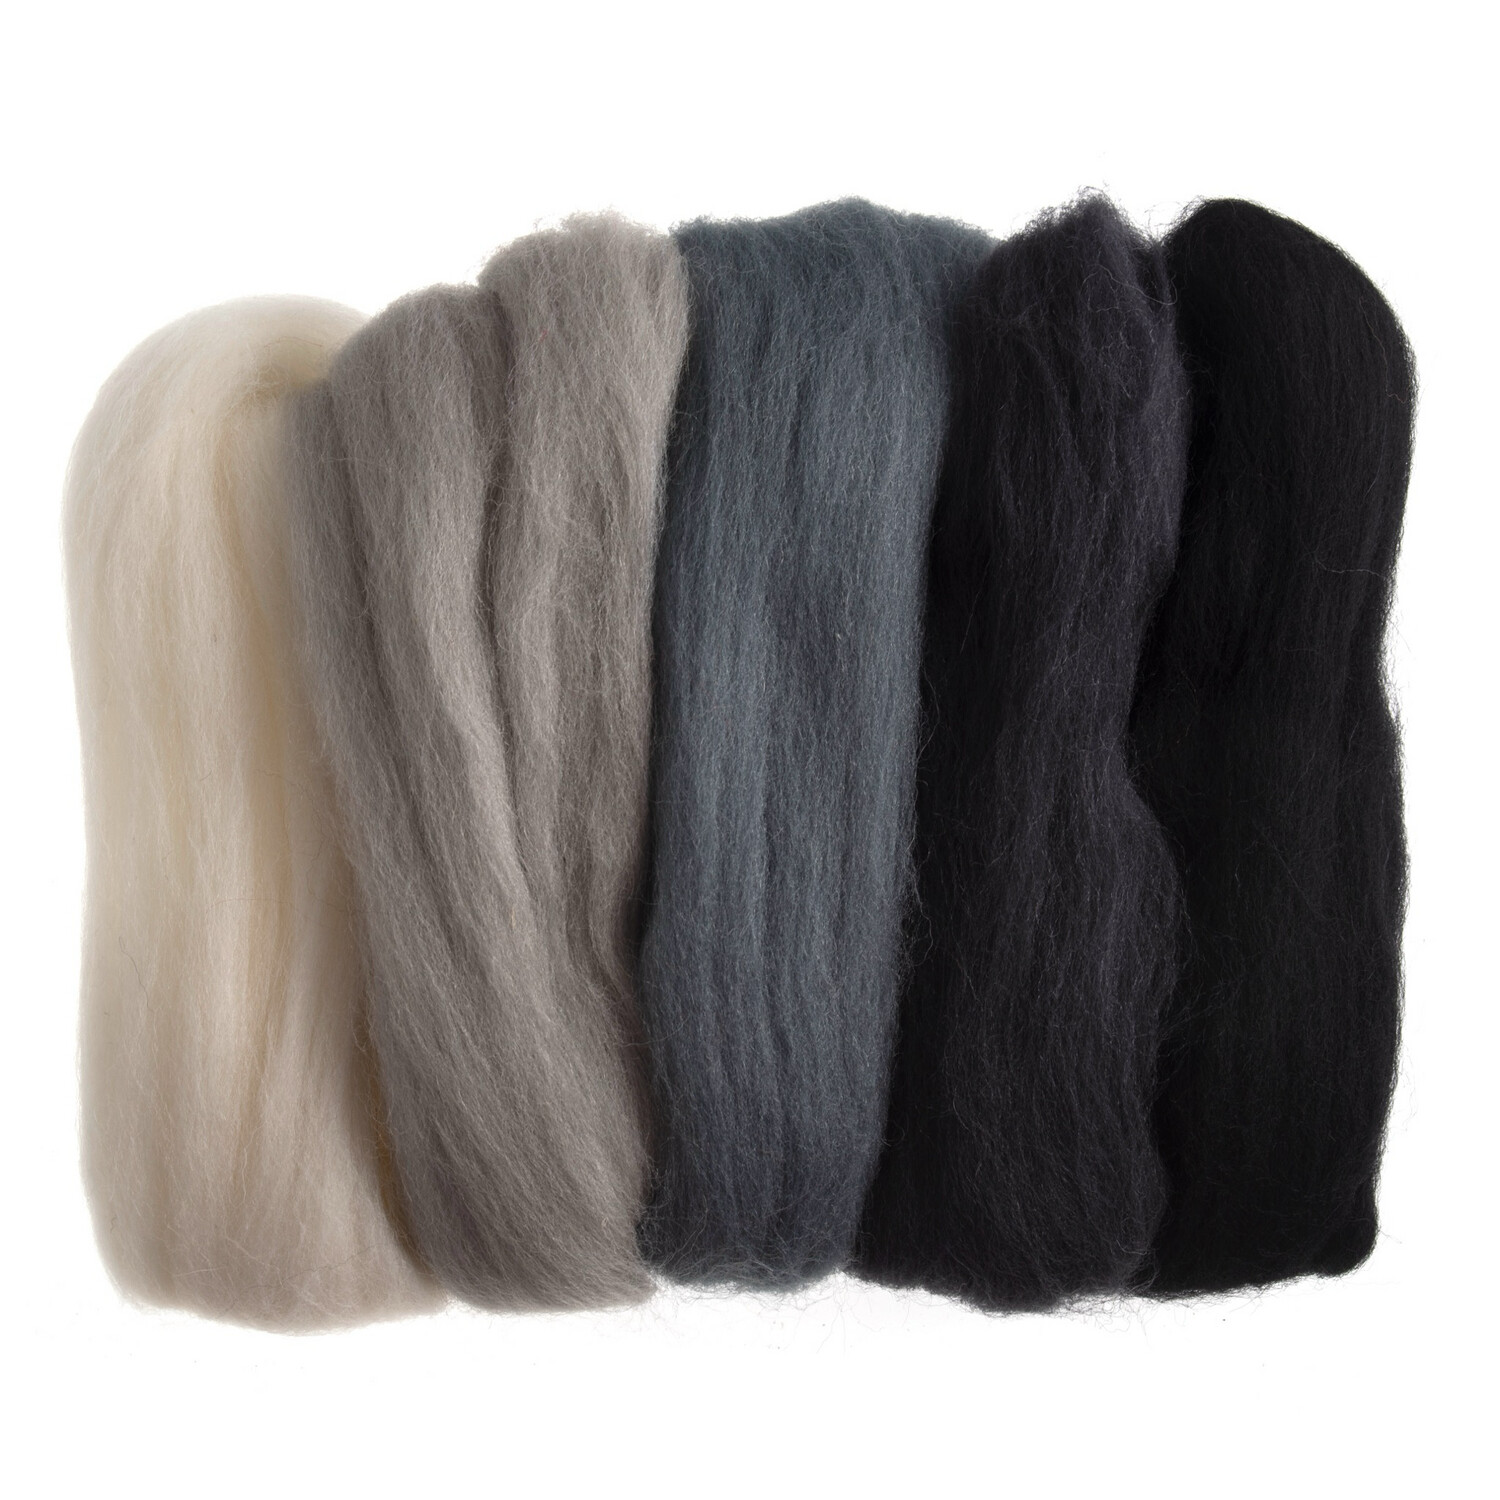 Natural Wool Roving: Assorted Monochrome